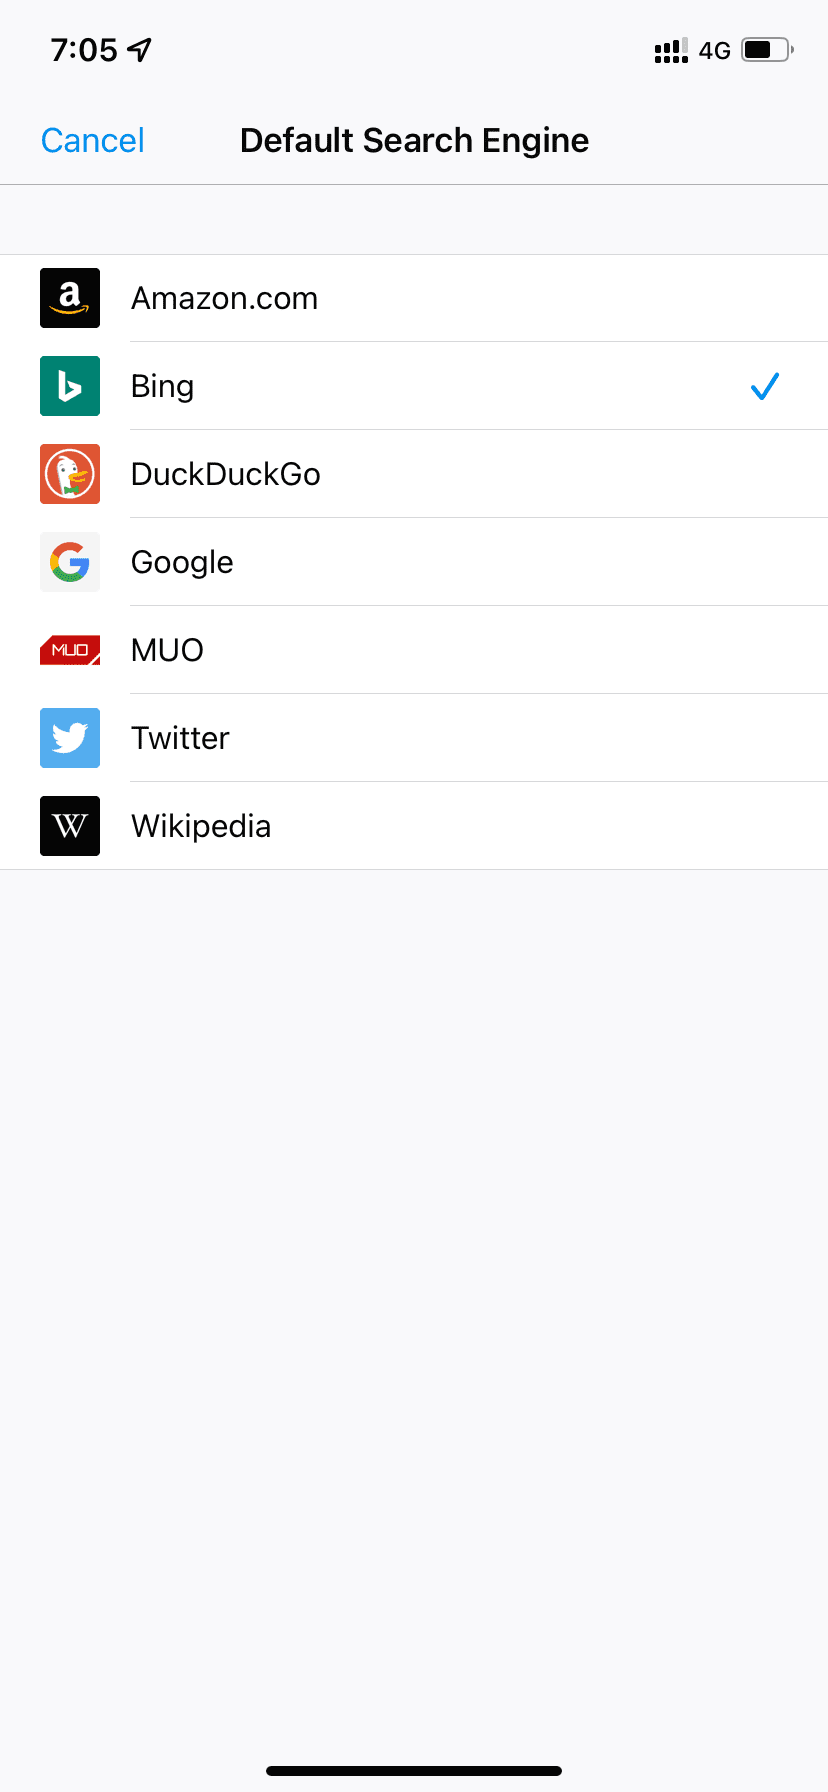 Default Search Engine in Firefox on iPhone